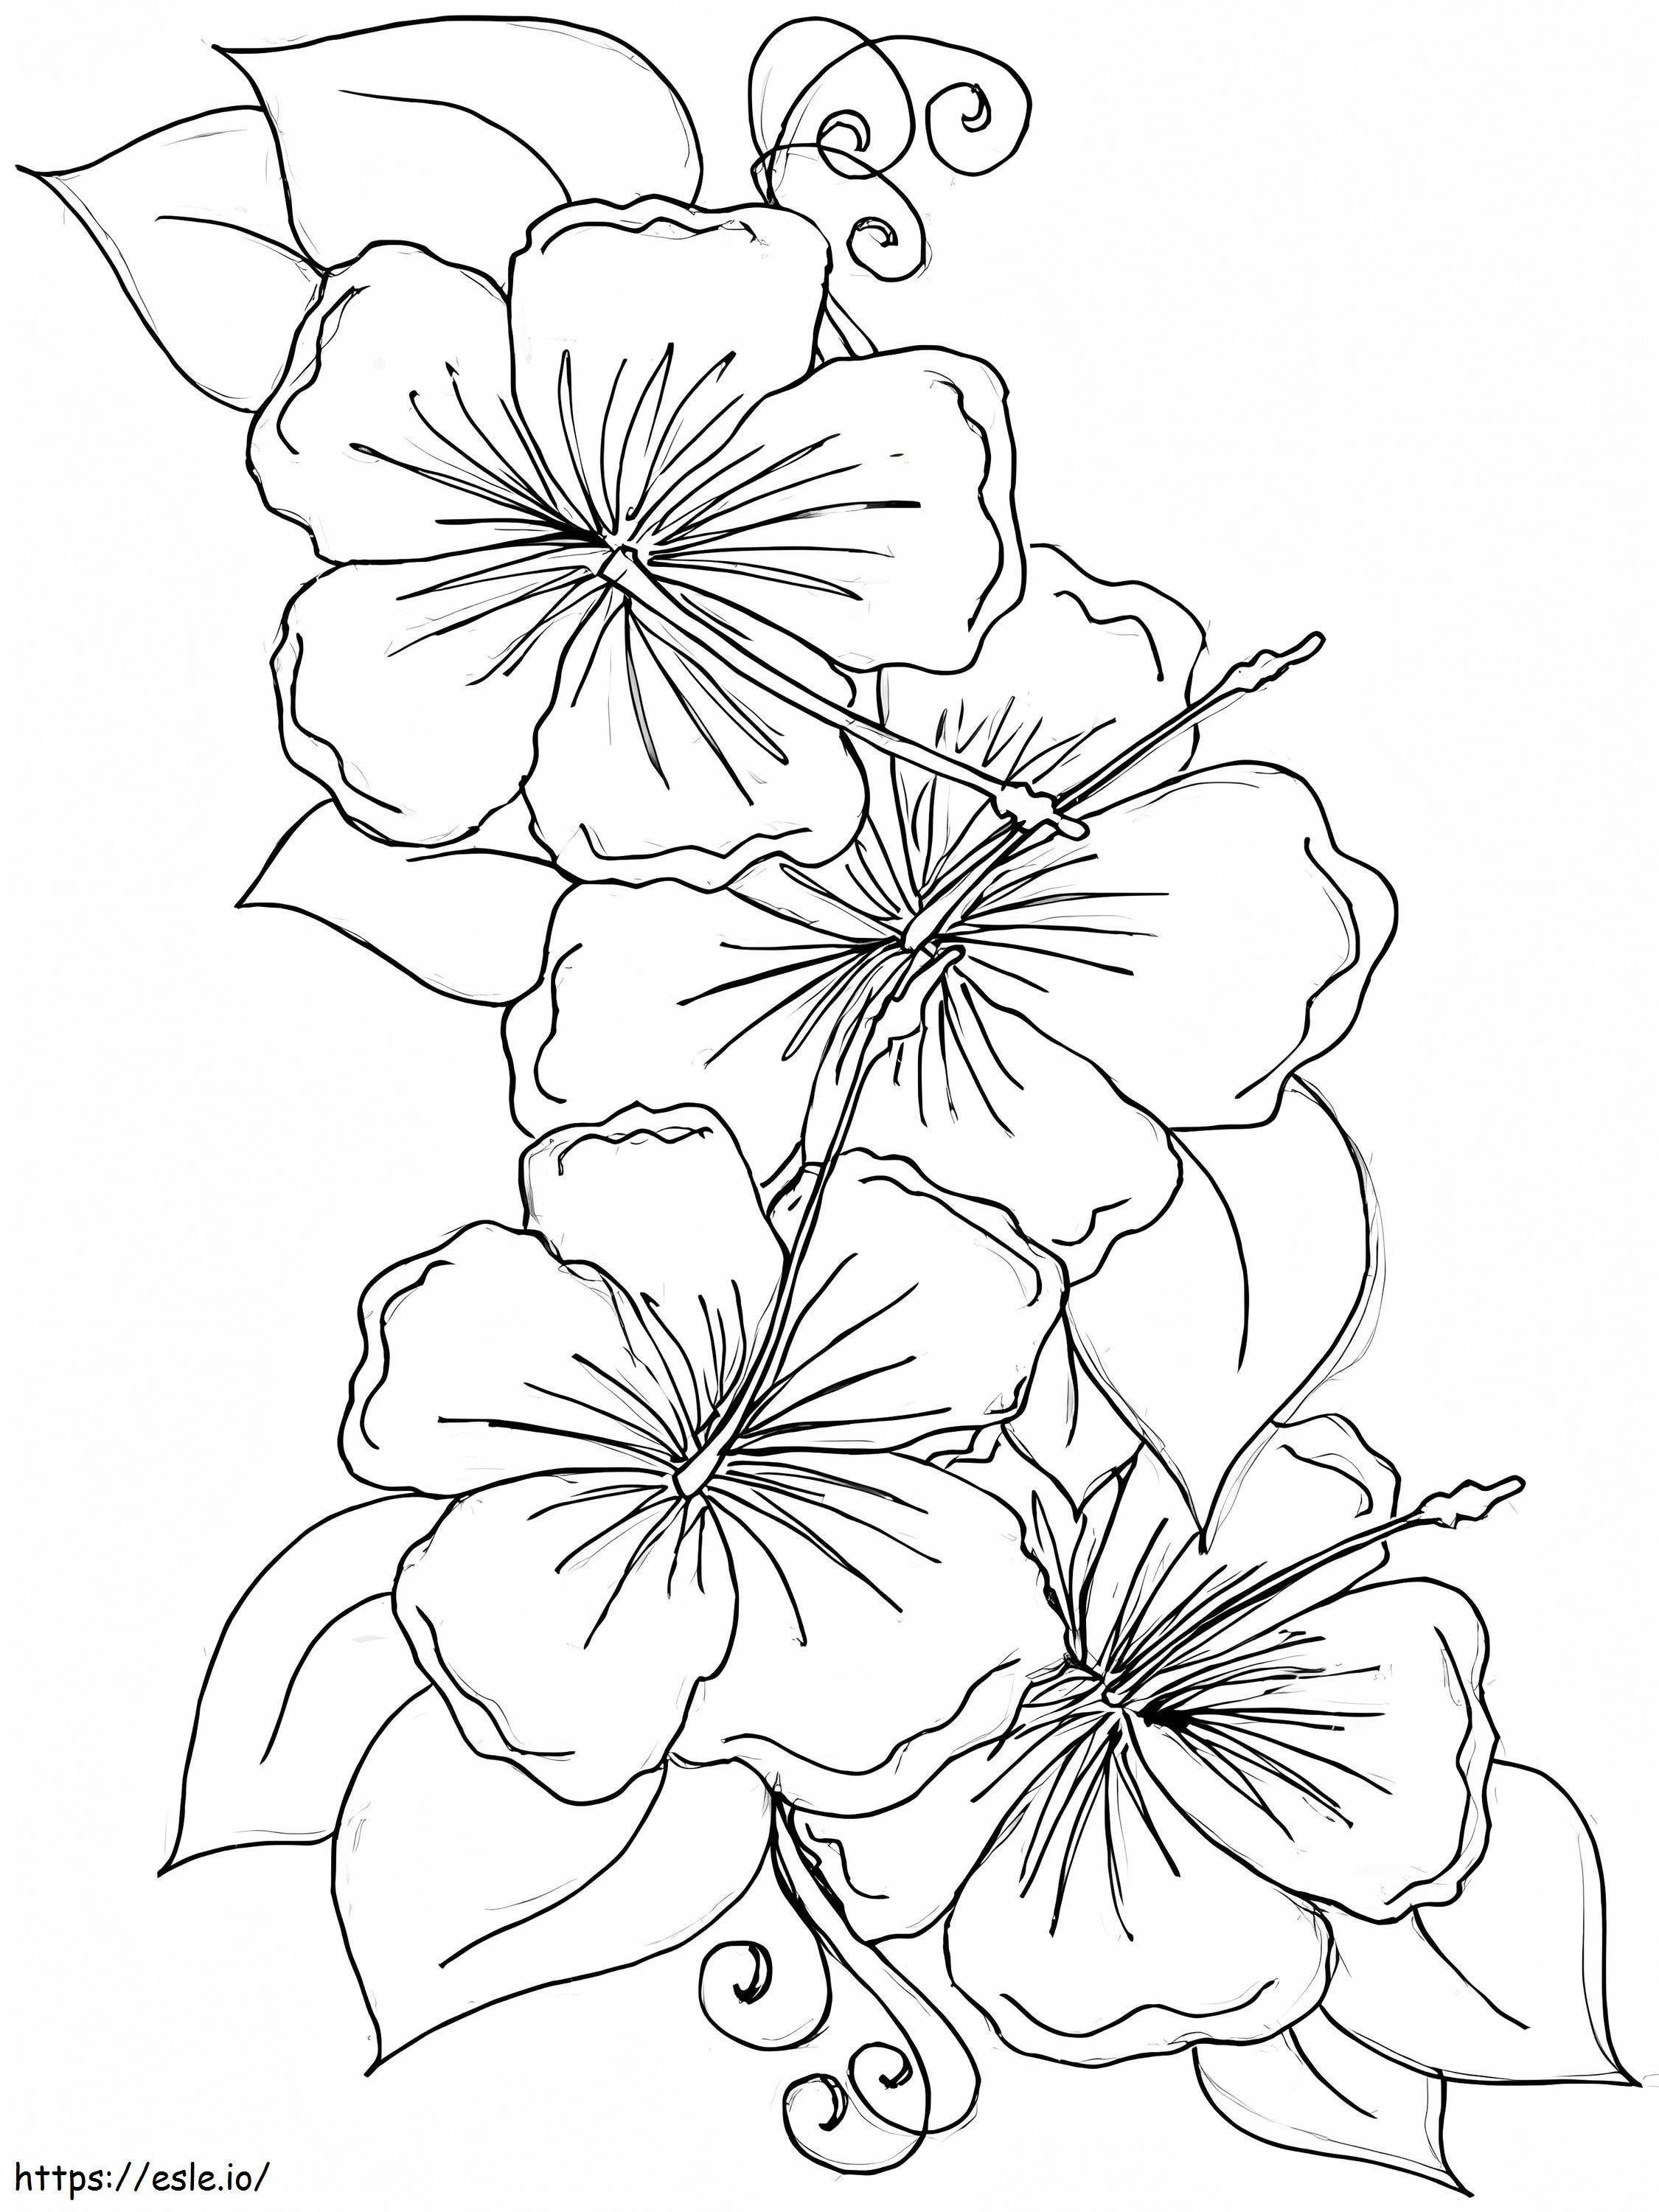 Hibiscus Flowers 2 coloring page